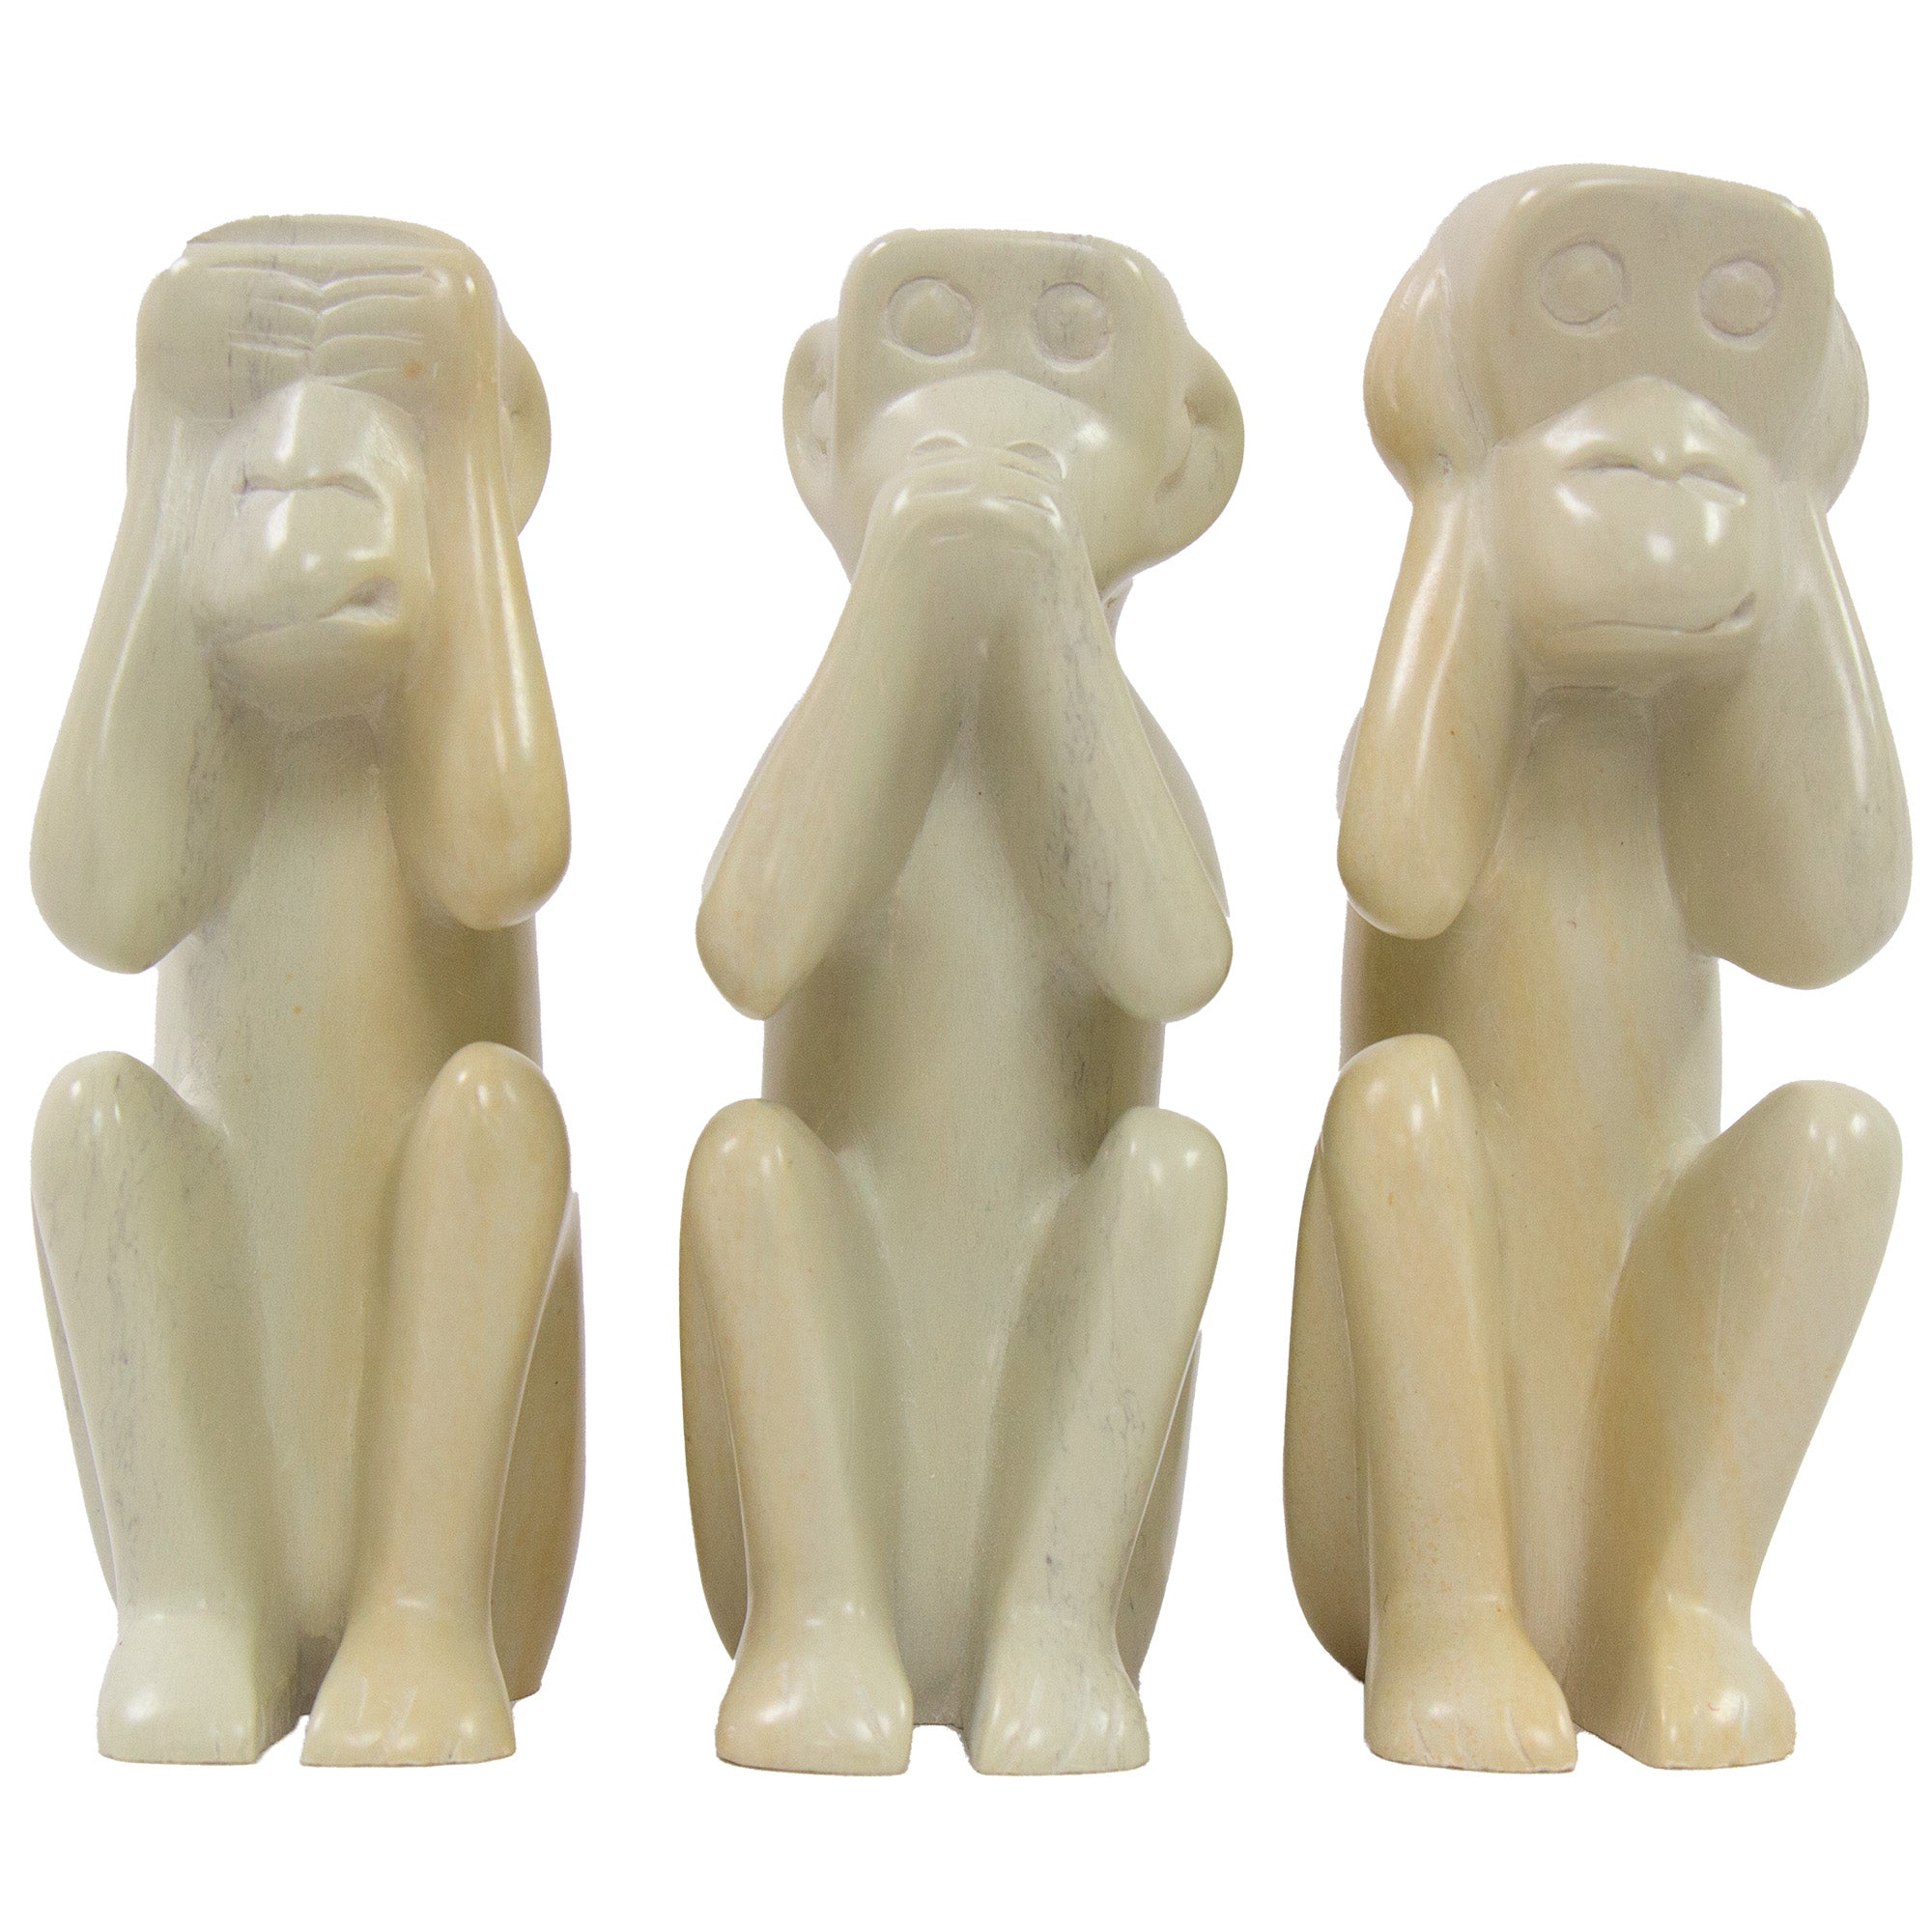 Candlestick　Soapstone　Crafts　Monkey　Hear　Global　See,　Do,　Statues　Holder　Wholesale